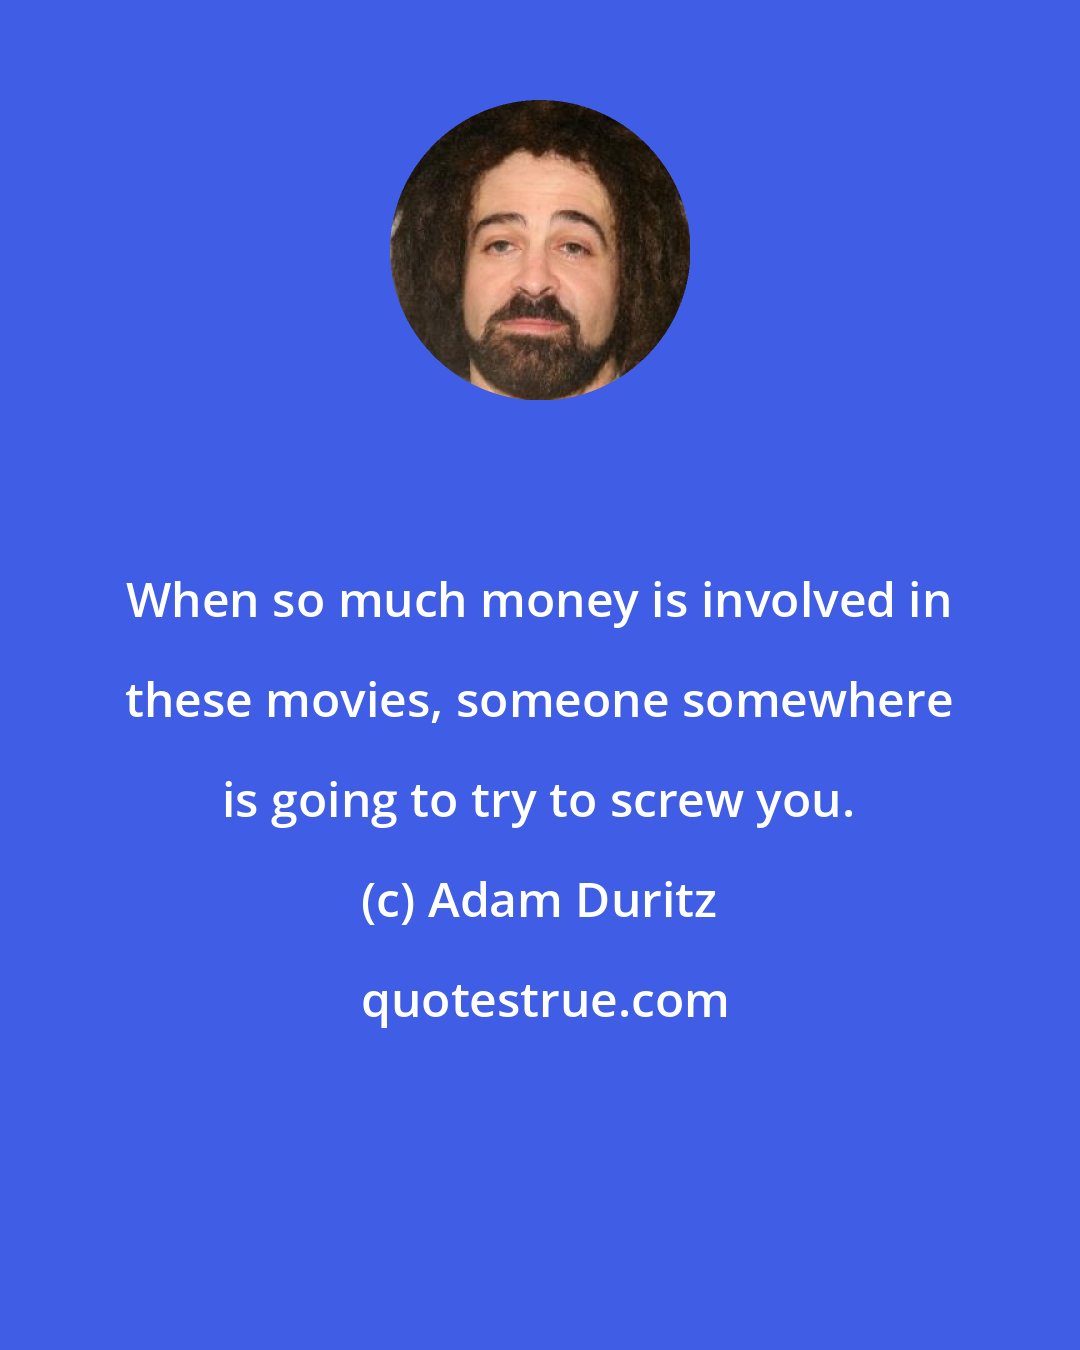 Adam Duritz: When so much money is involved in these movies, someone somewhere is going to try to screw you.